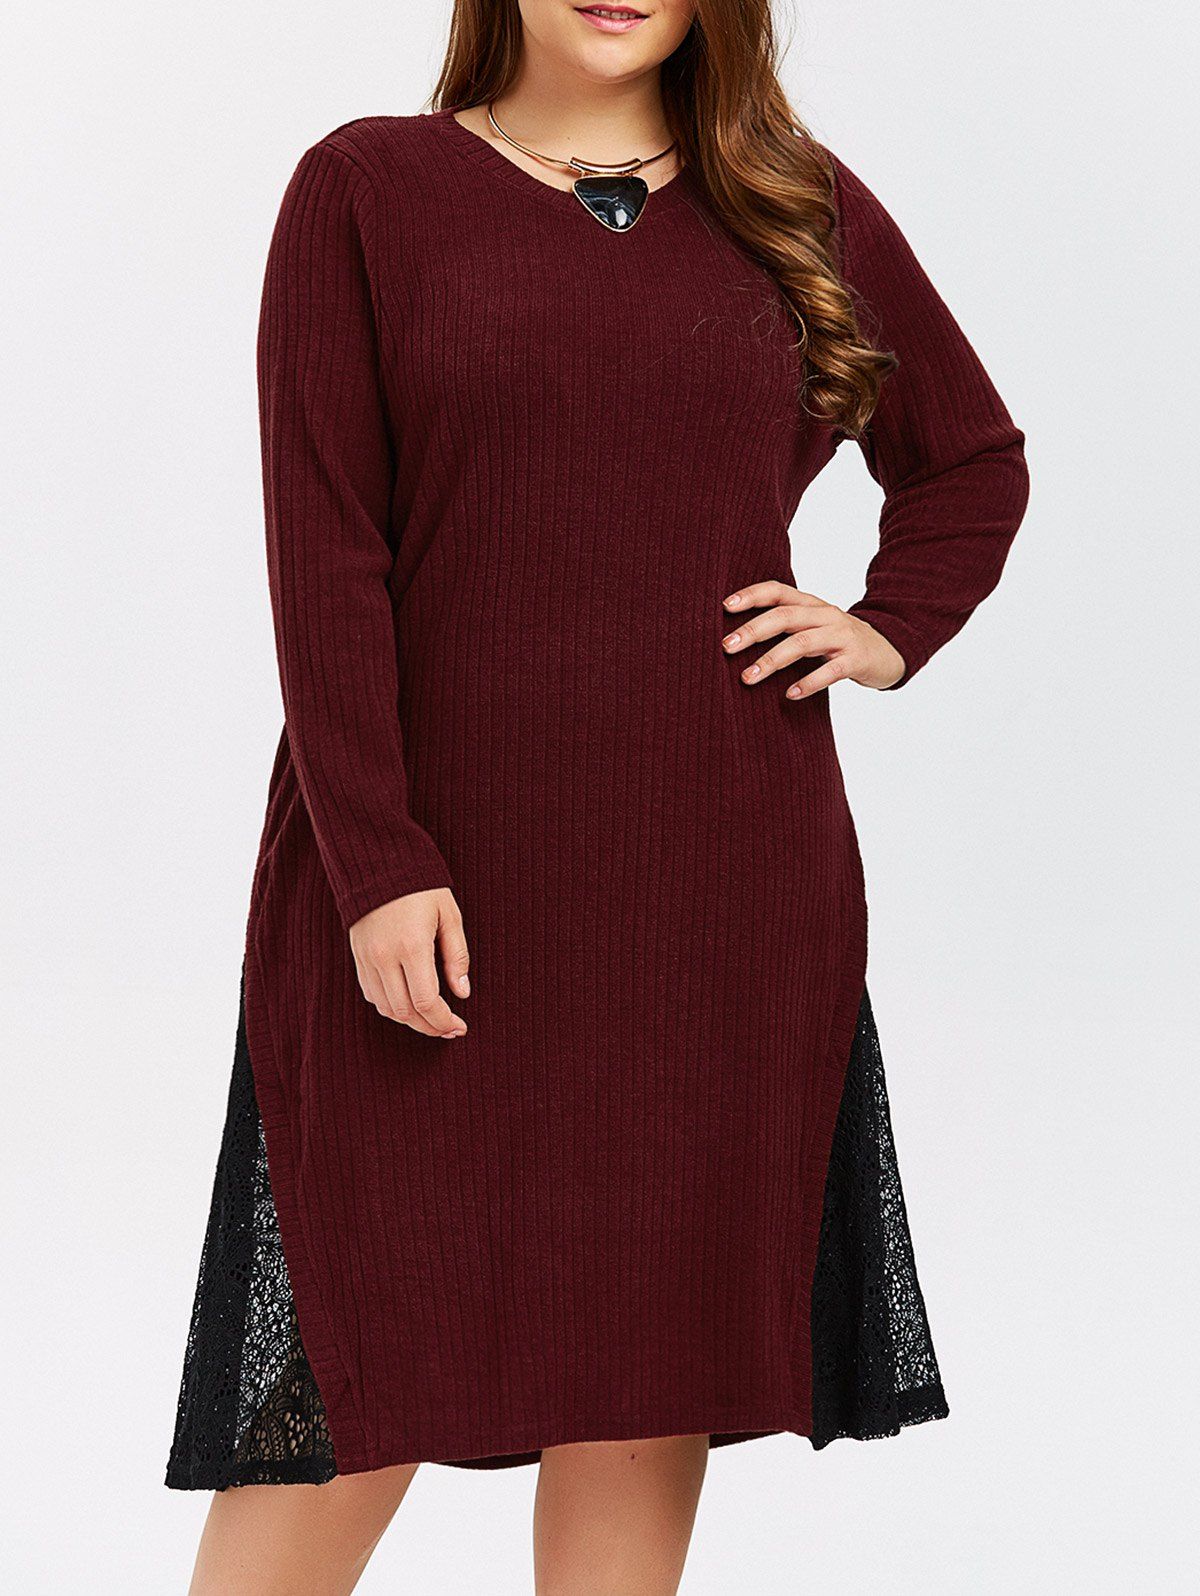 [17% OFF] 2020 Lace Panel Plus Size Knitted Dress In WINE RED | DressLily